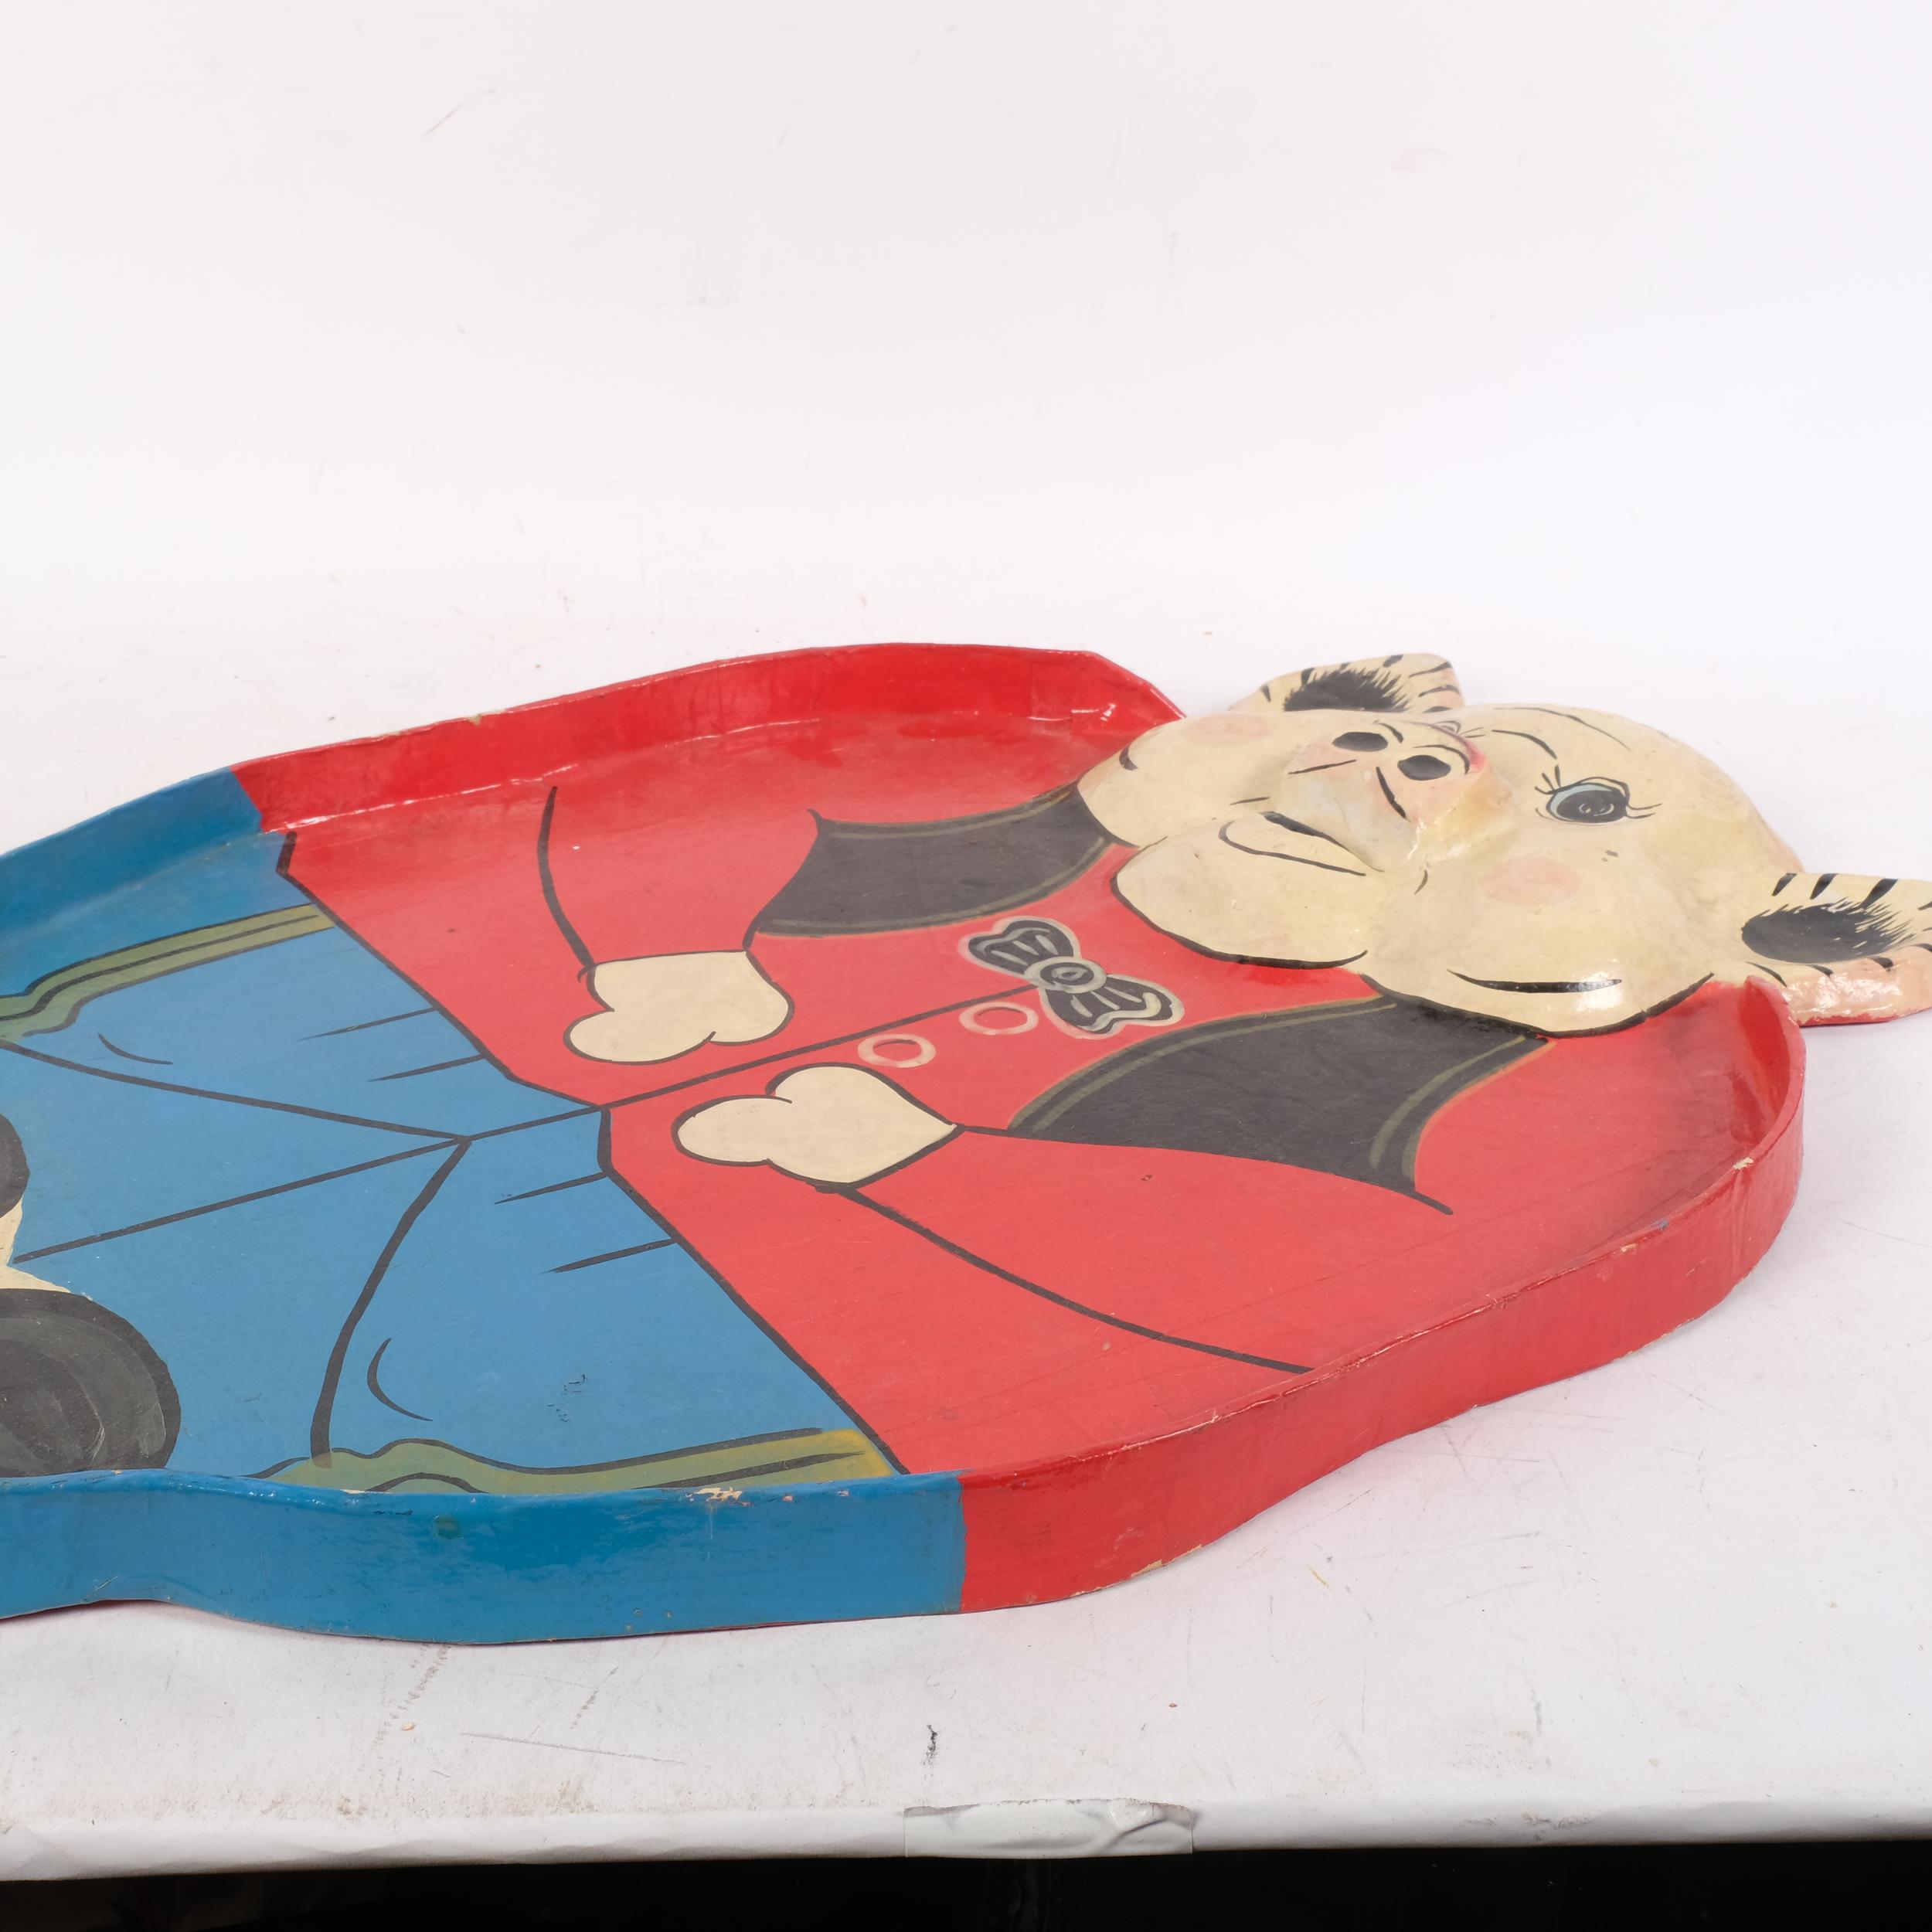 A Vintage papier mache serving tray or board game, in the form of a pig, 58cm x 40cm - Image 2 of 2